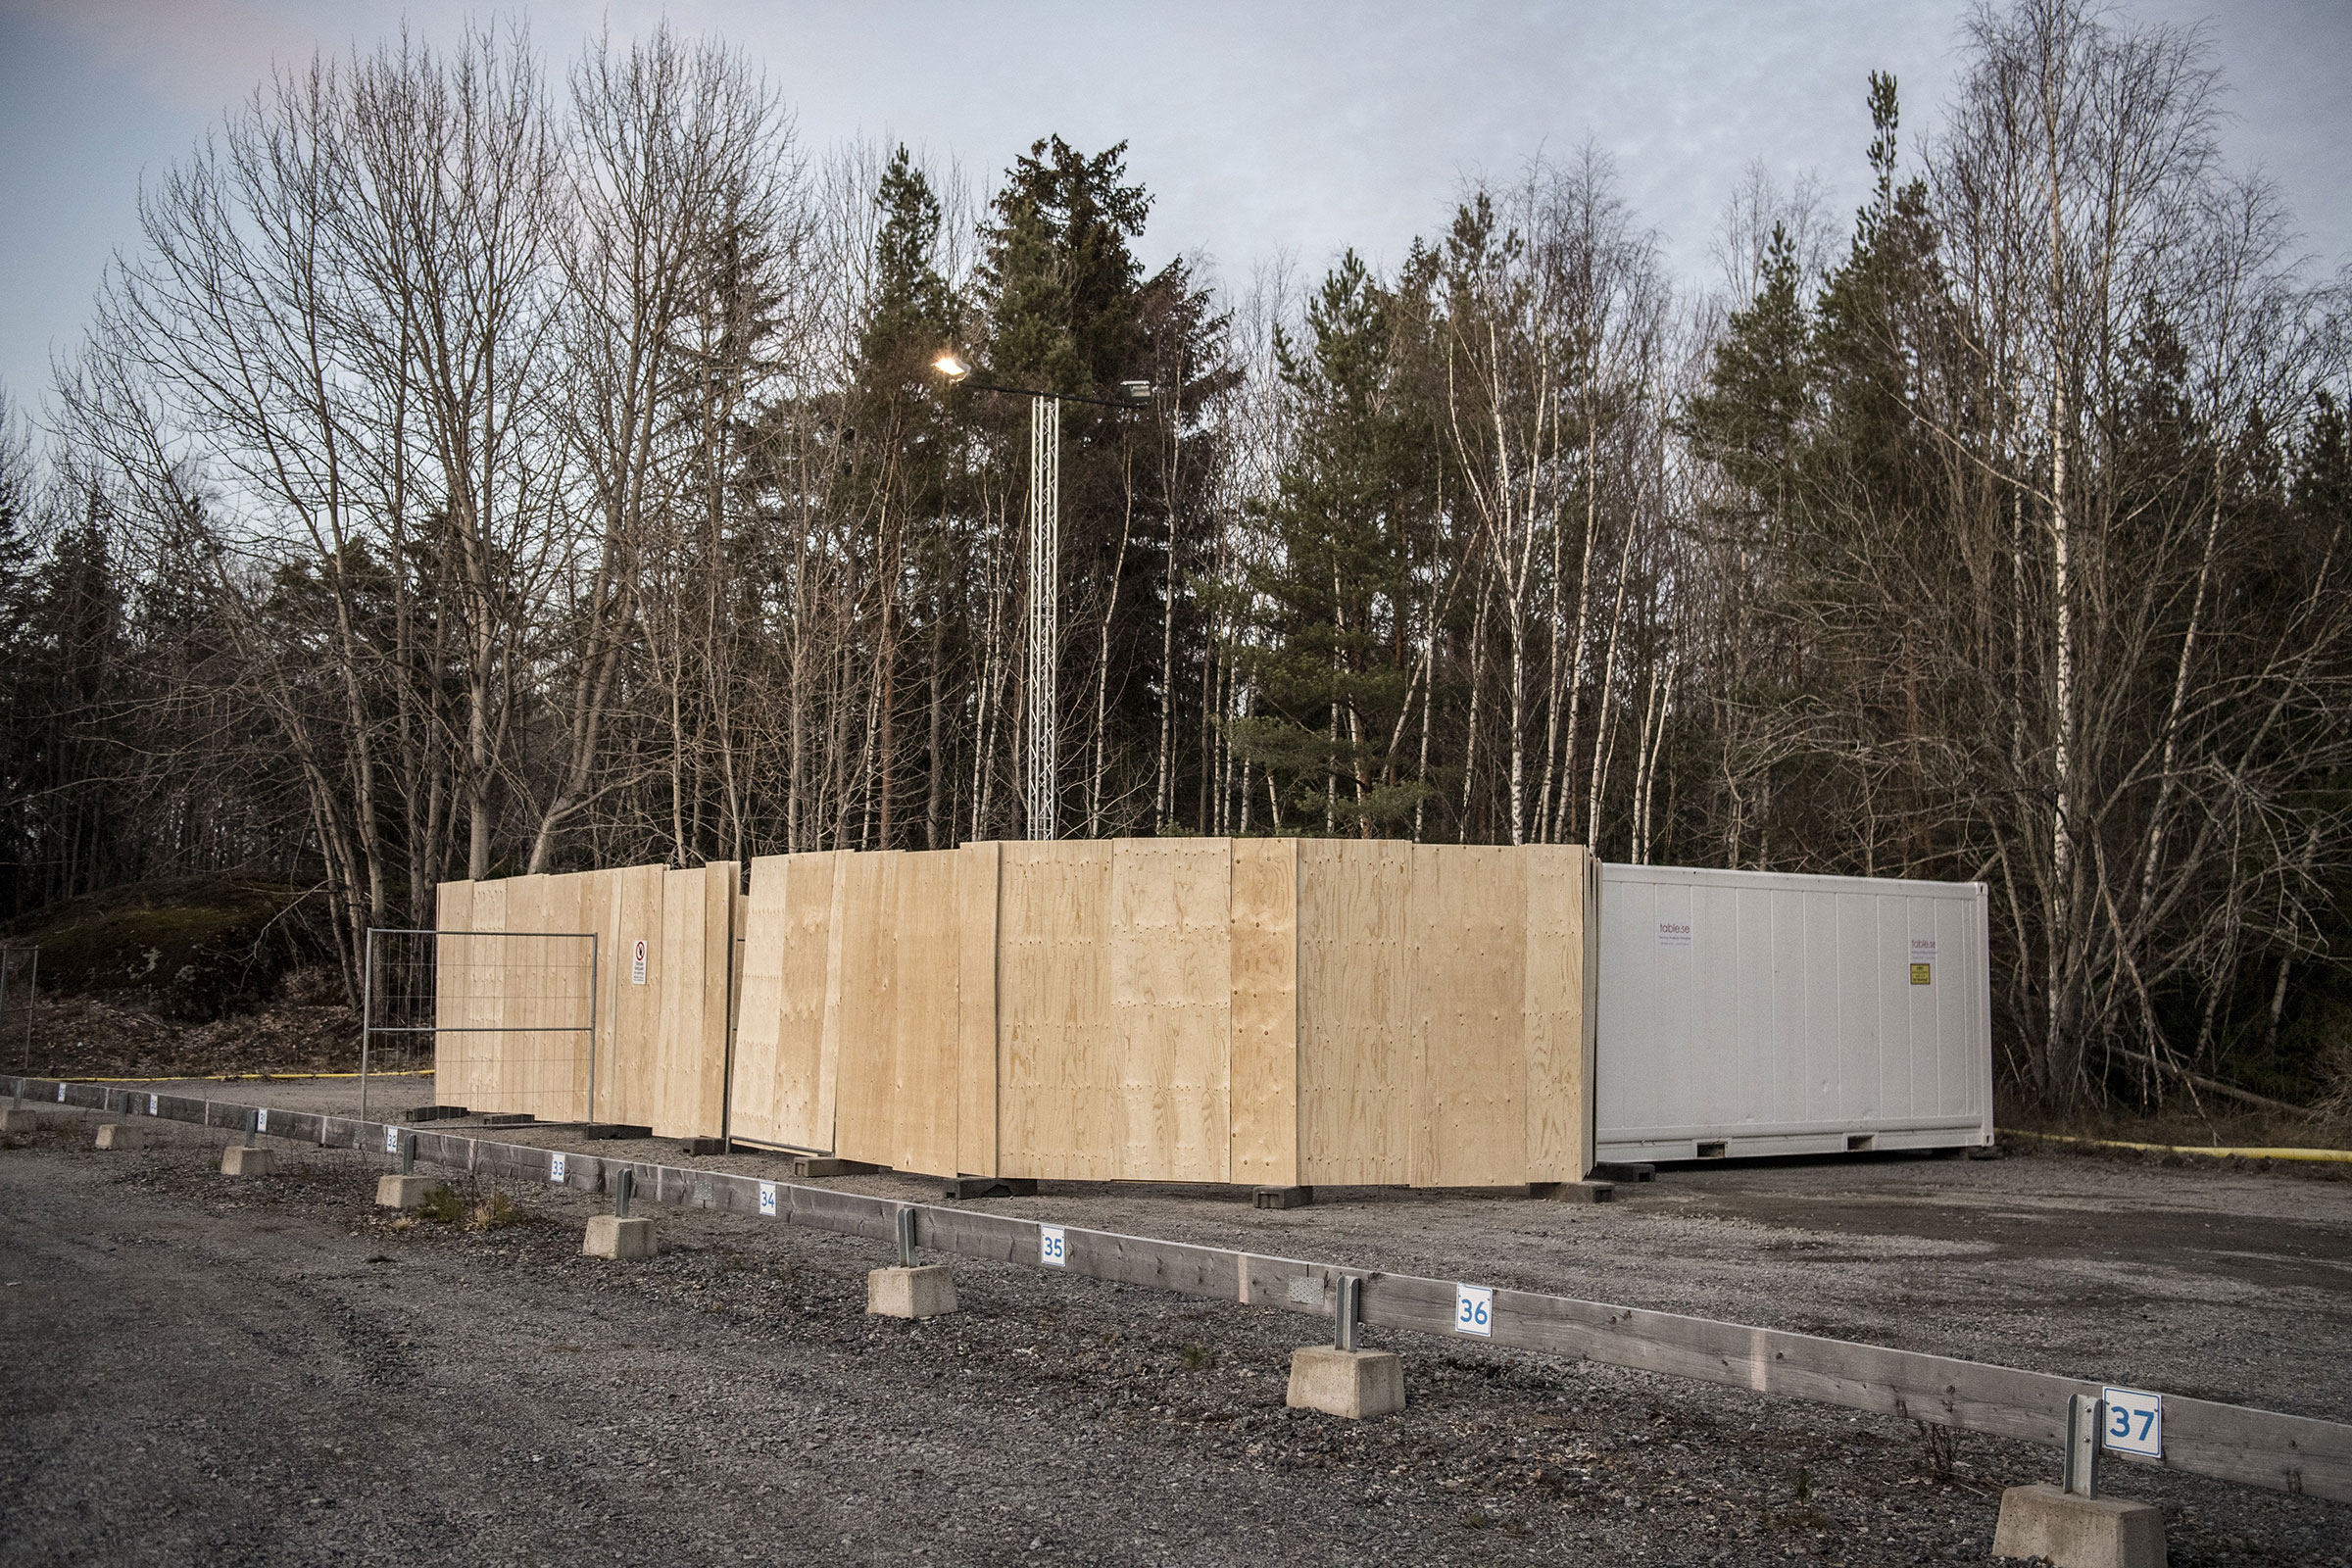 Refrigeration containers to be used on standby as makeshift morgues to store people who have died from COVID-19 set up behind Karolinska University Hospital in Huddinge, Sweden on March 26, 2020. (IBL/Shutterstock)